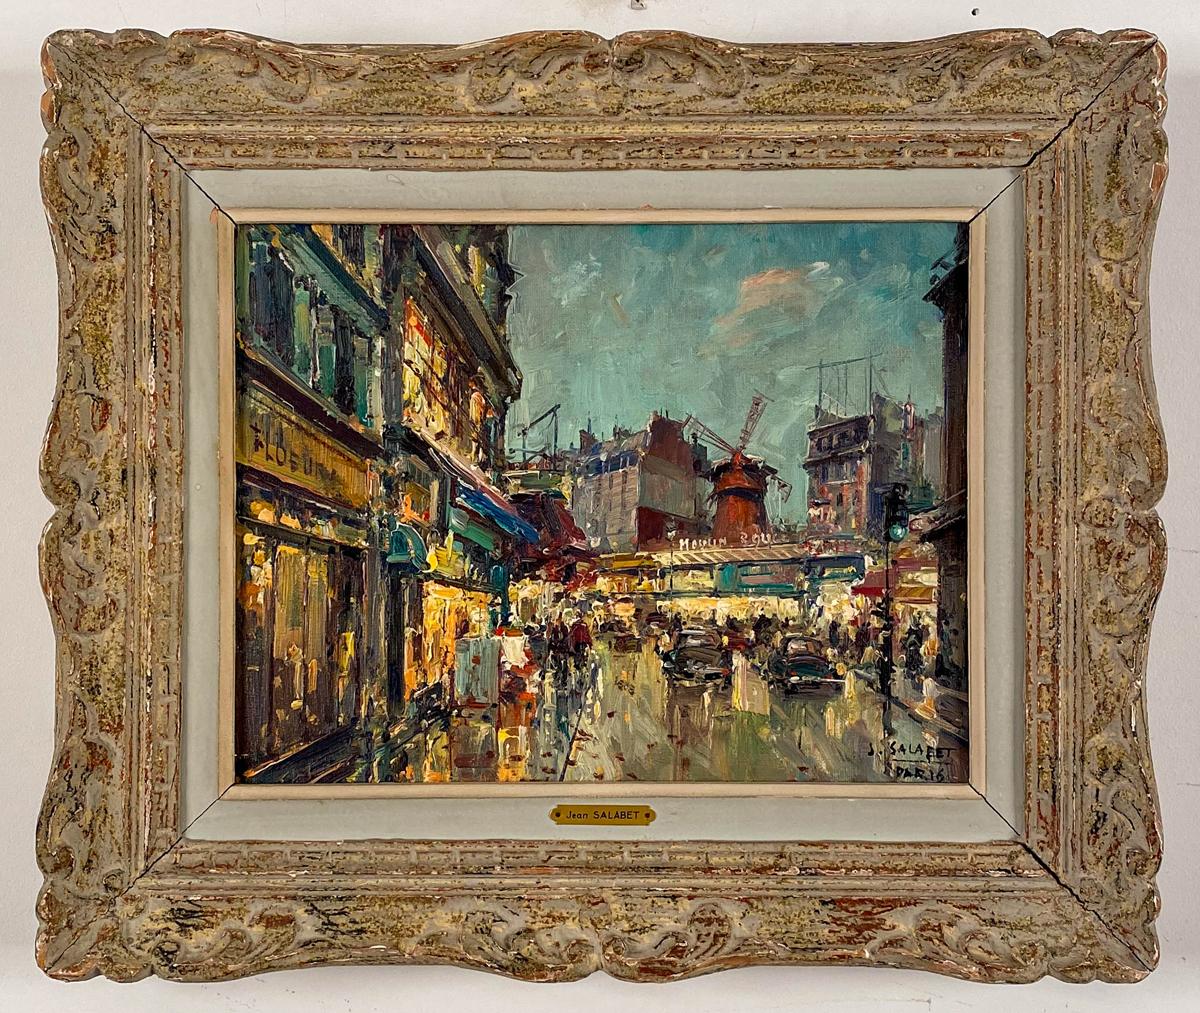 Jean Salabet
French, B. 1900
Moulin Rouge

Oil on canvas 
10 ½ by 13 ¾ in.  W/frame 16 ½ by 19 ½ in.
Signed lower right 

Jean Salabet was a School of Paris painter know for his colorful Parisian cityscapes. 
His work is comparable to those of Jules